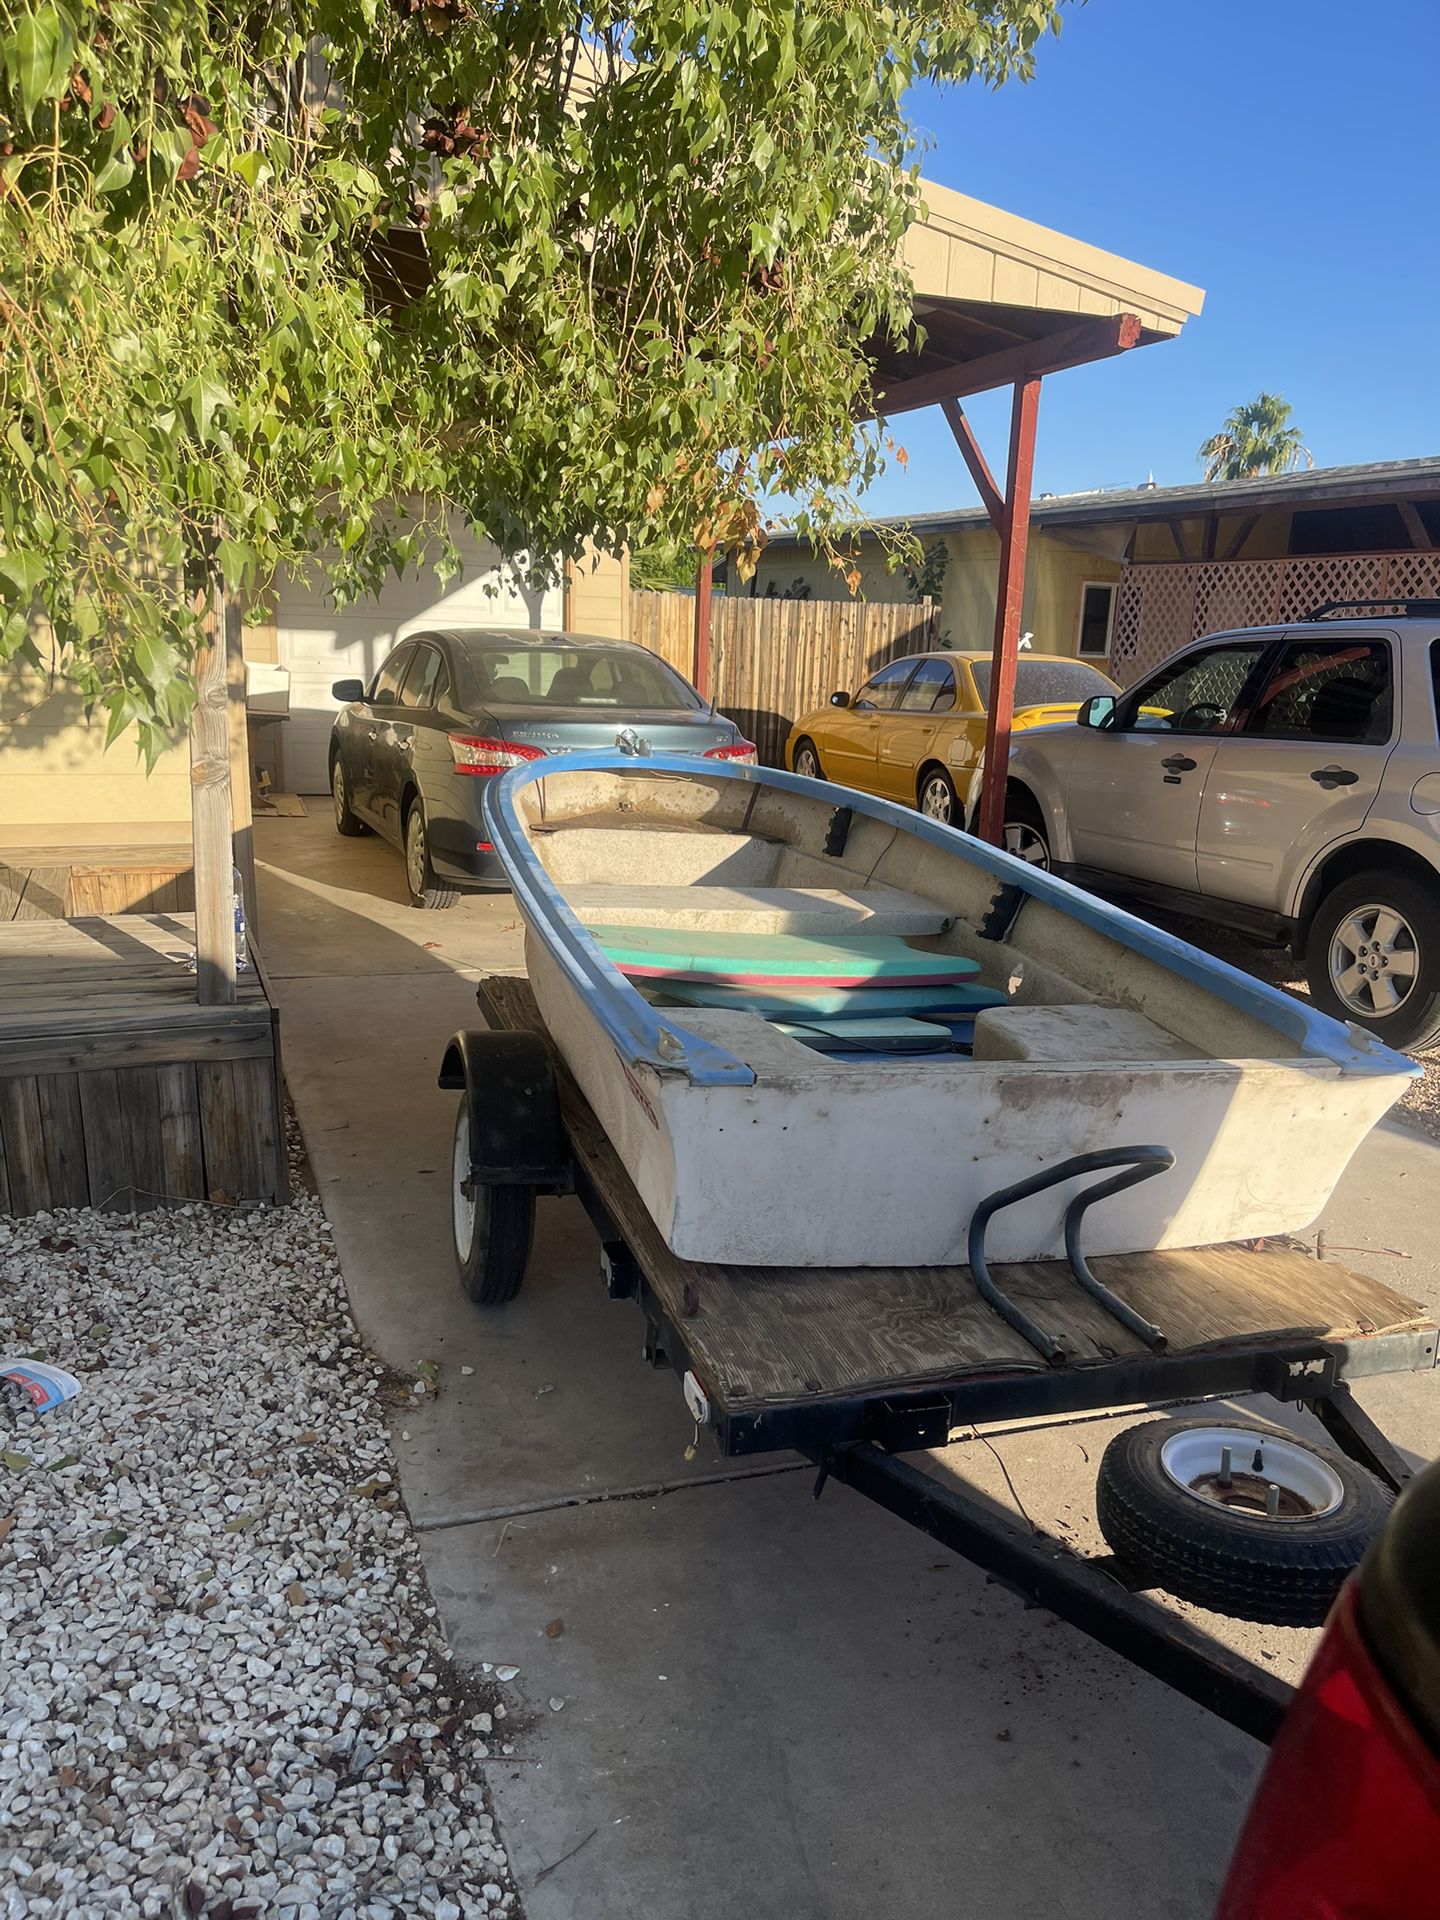 Small Boat For Sale 